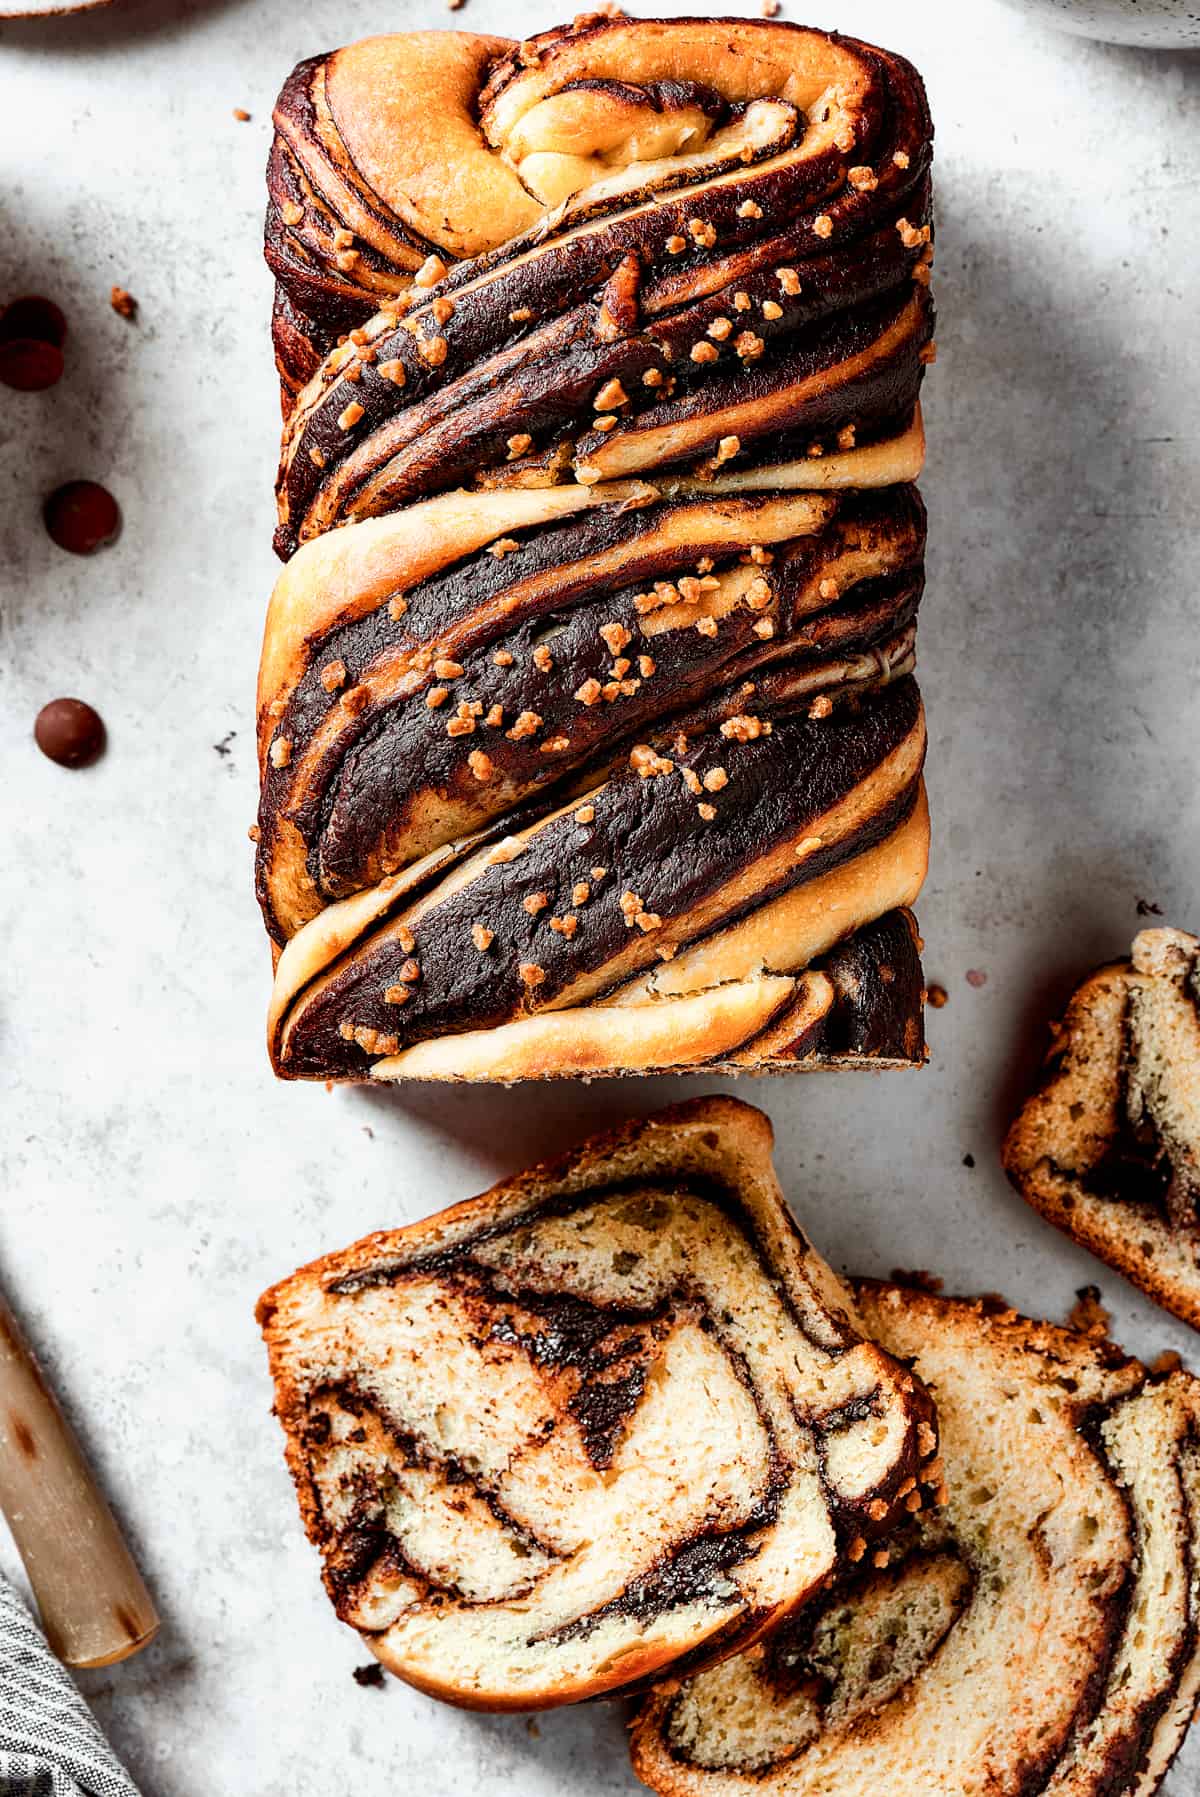 A loaf of chocolate babka that has been partially sliced. The slices are laid out on the work surface, along with a bread knife and a dish of chocolate chips.